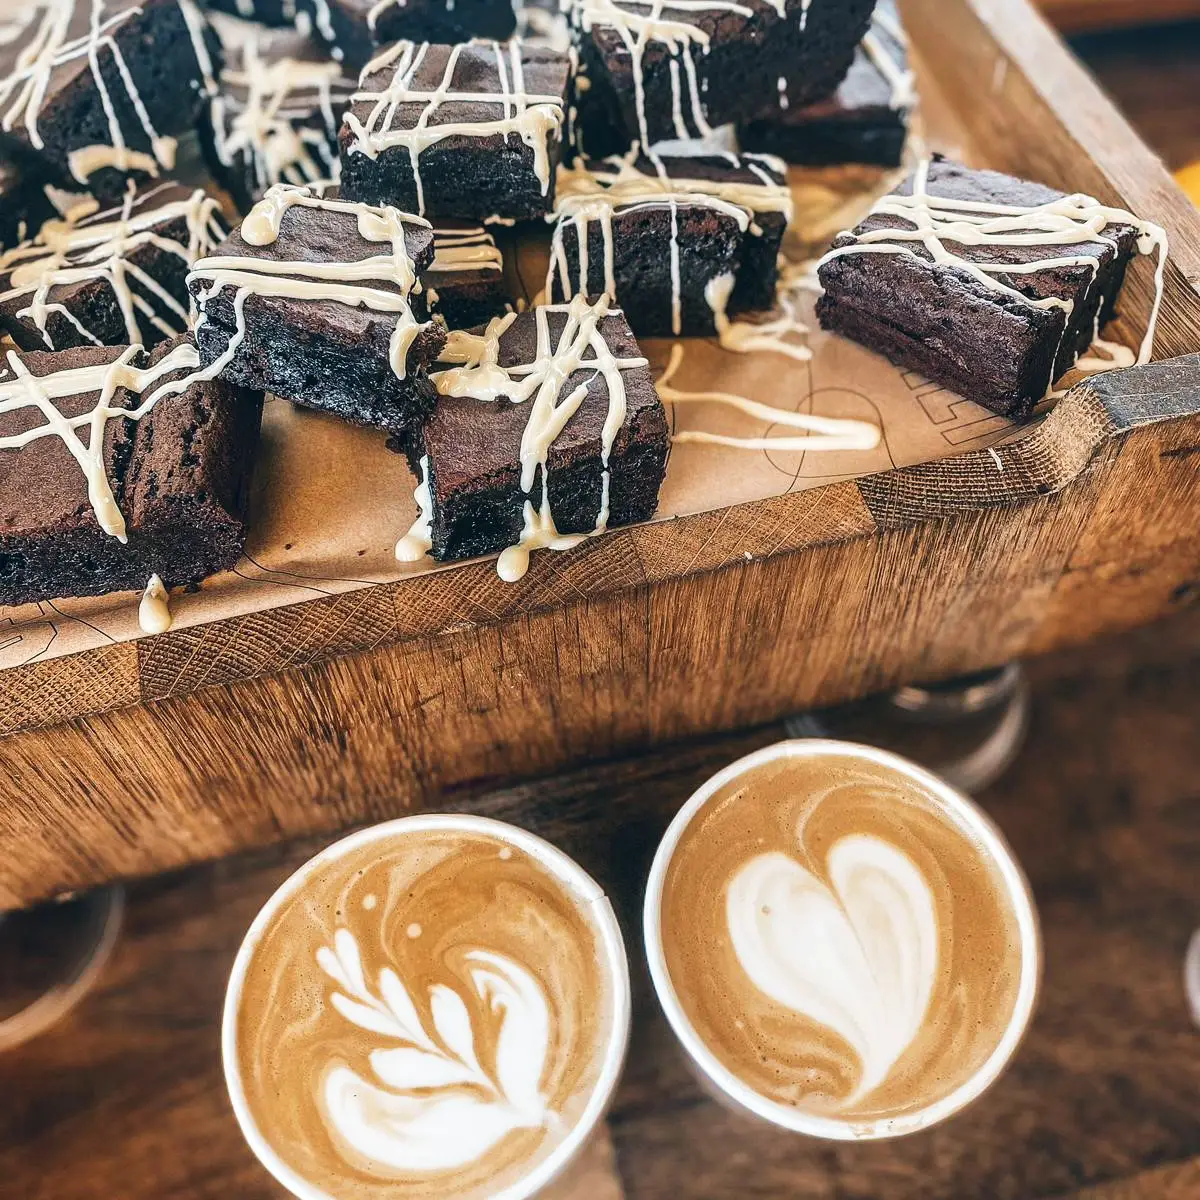 Photograph of coffee and brownies.